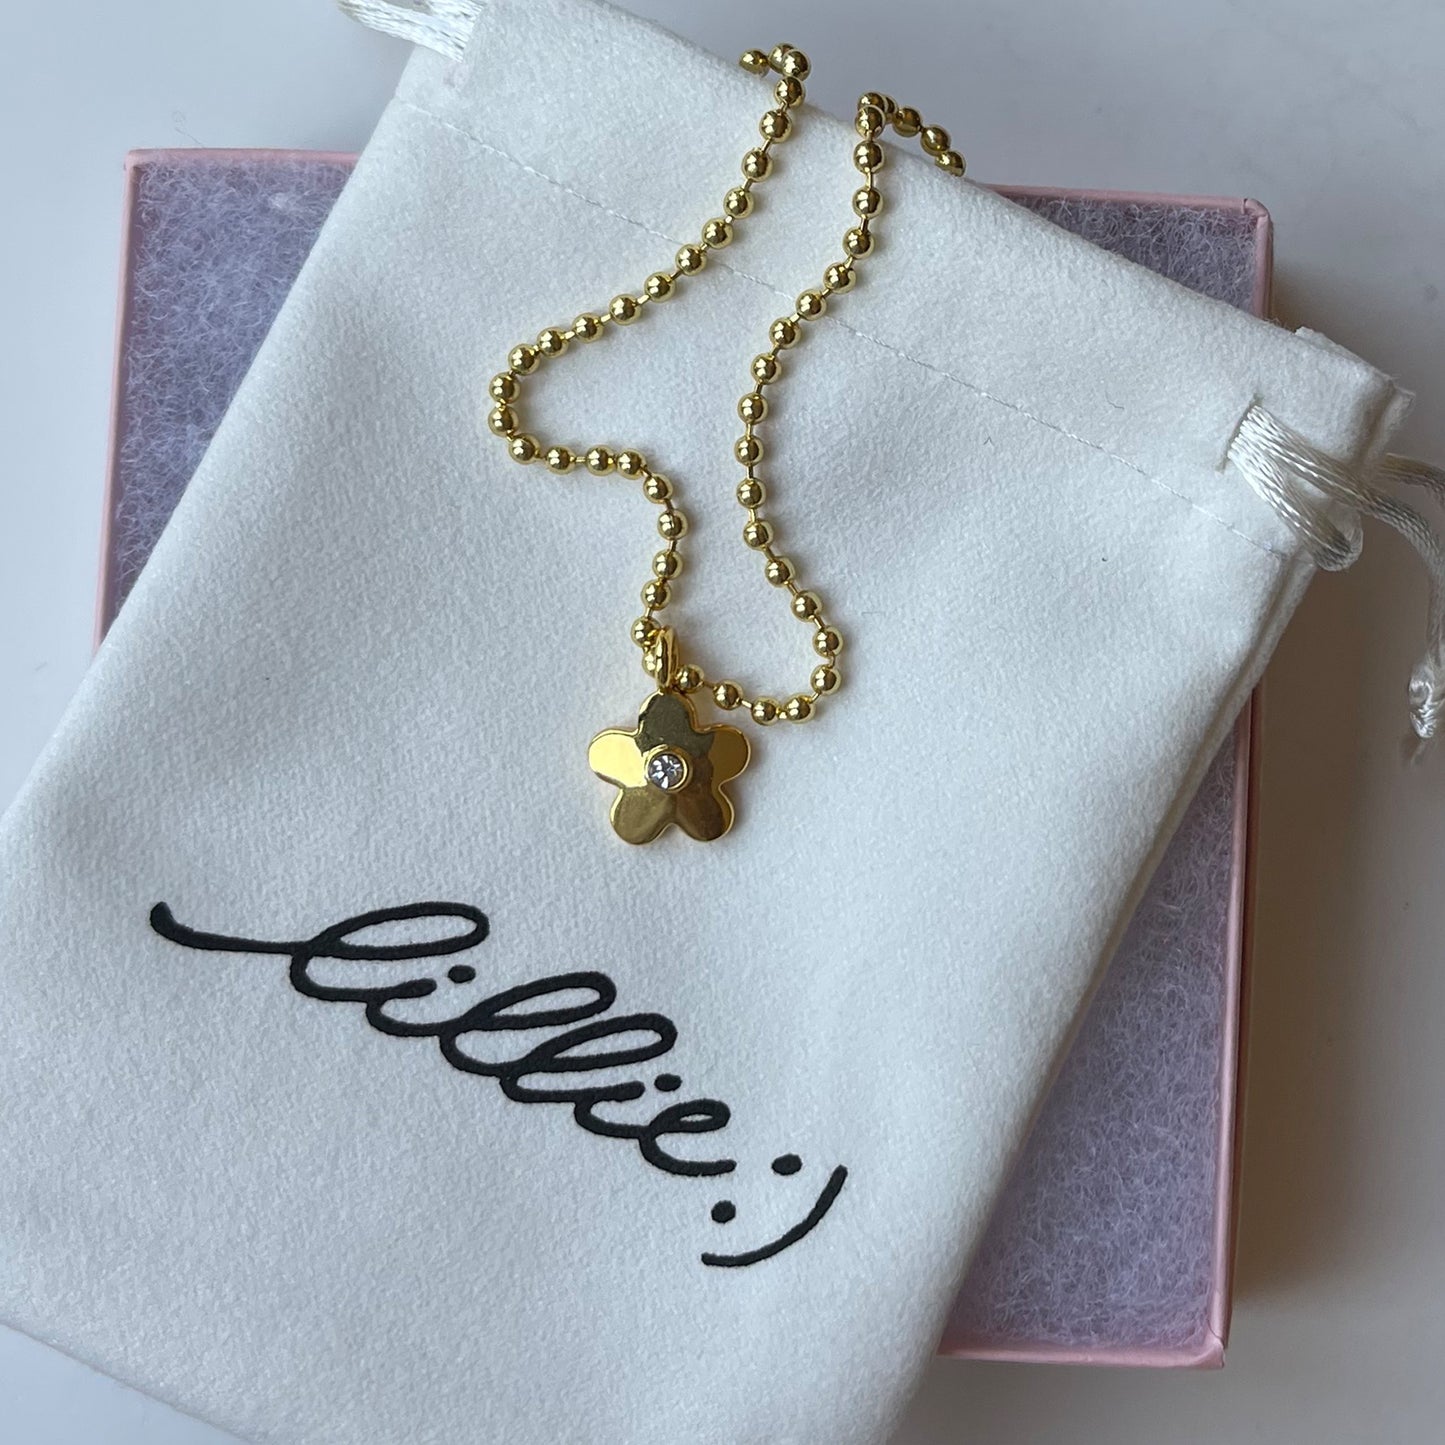 Gold Daisy Necklace